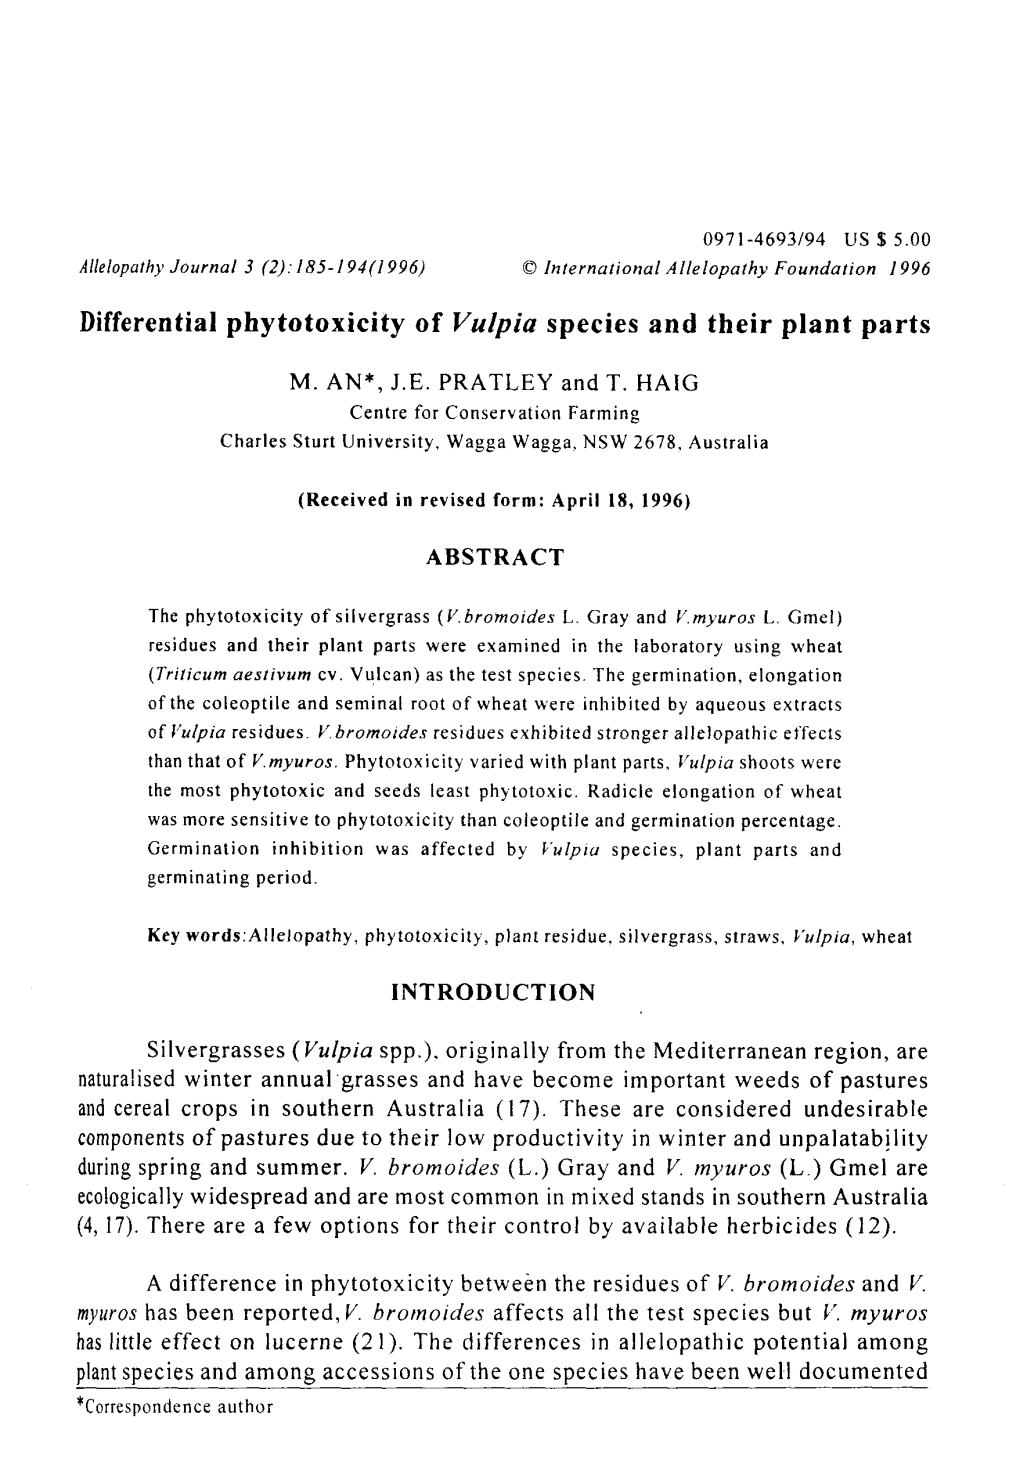 Differential Phytotoxicity of Vulpia Species and Their Plant Parts